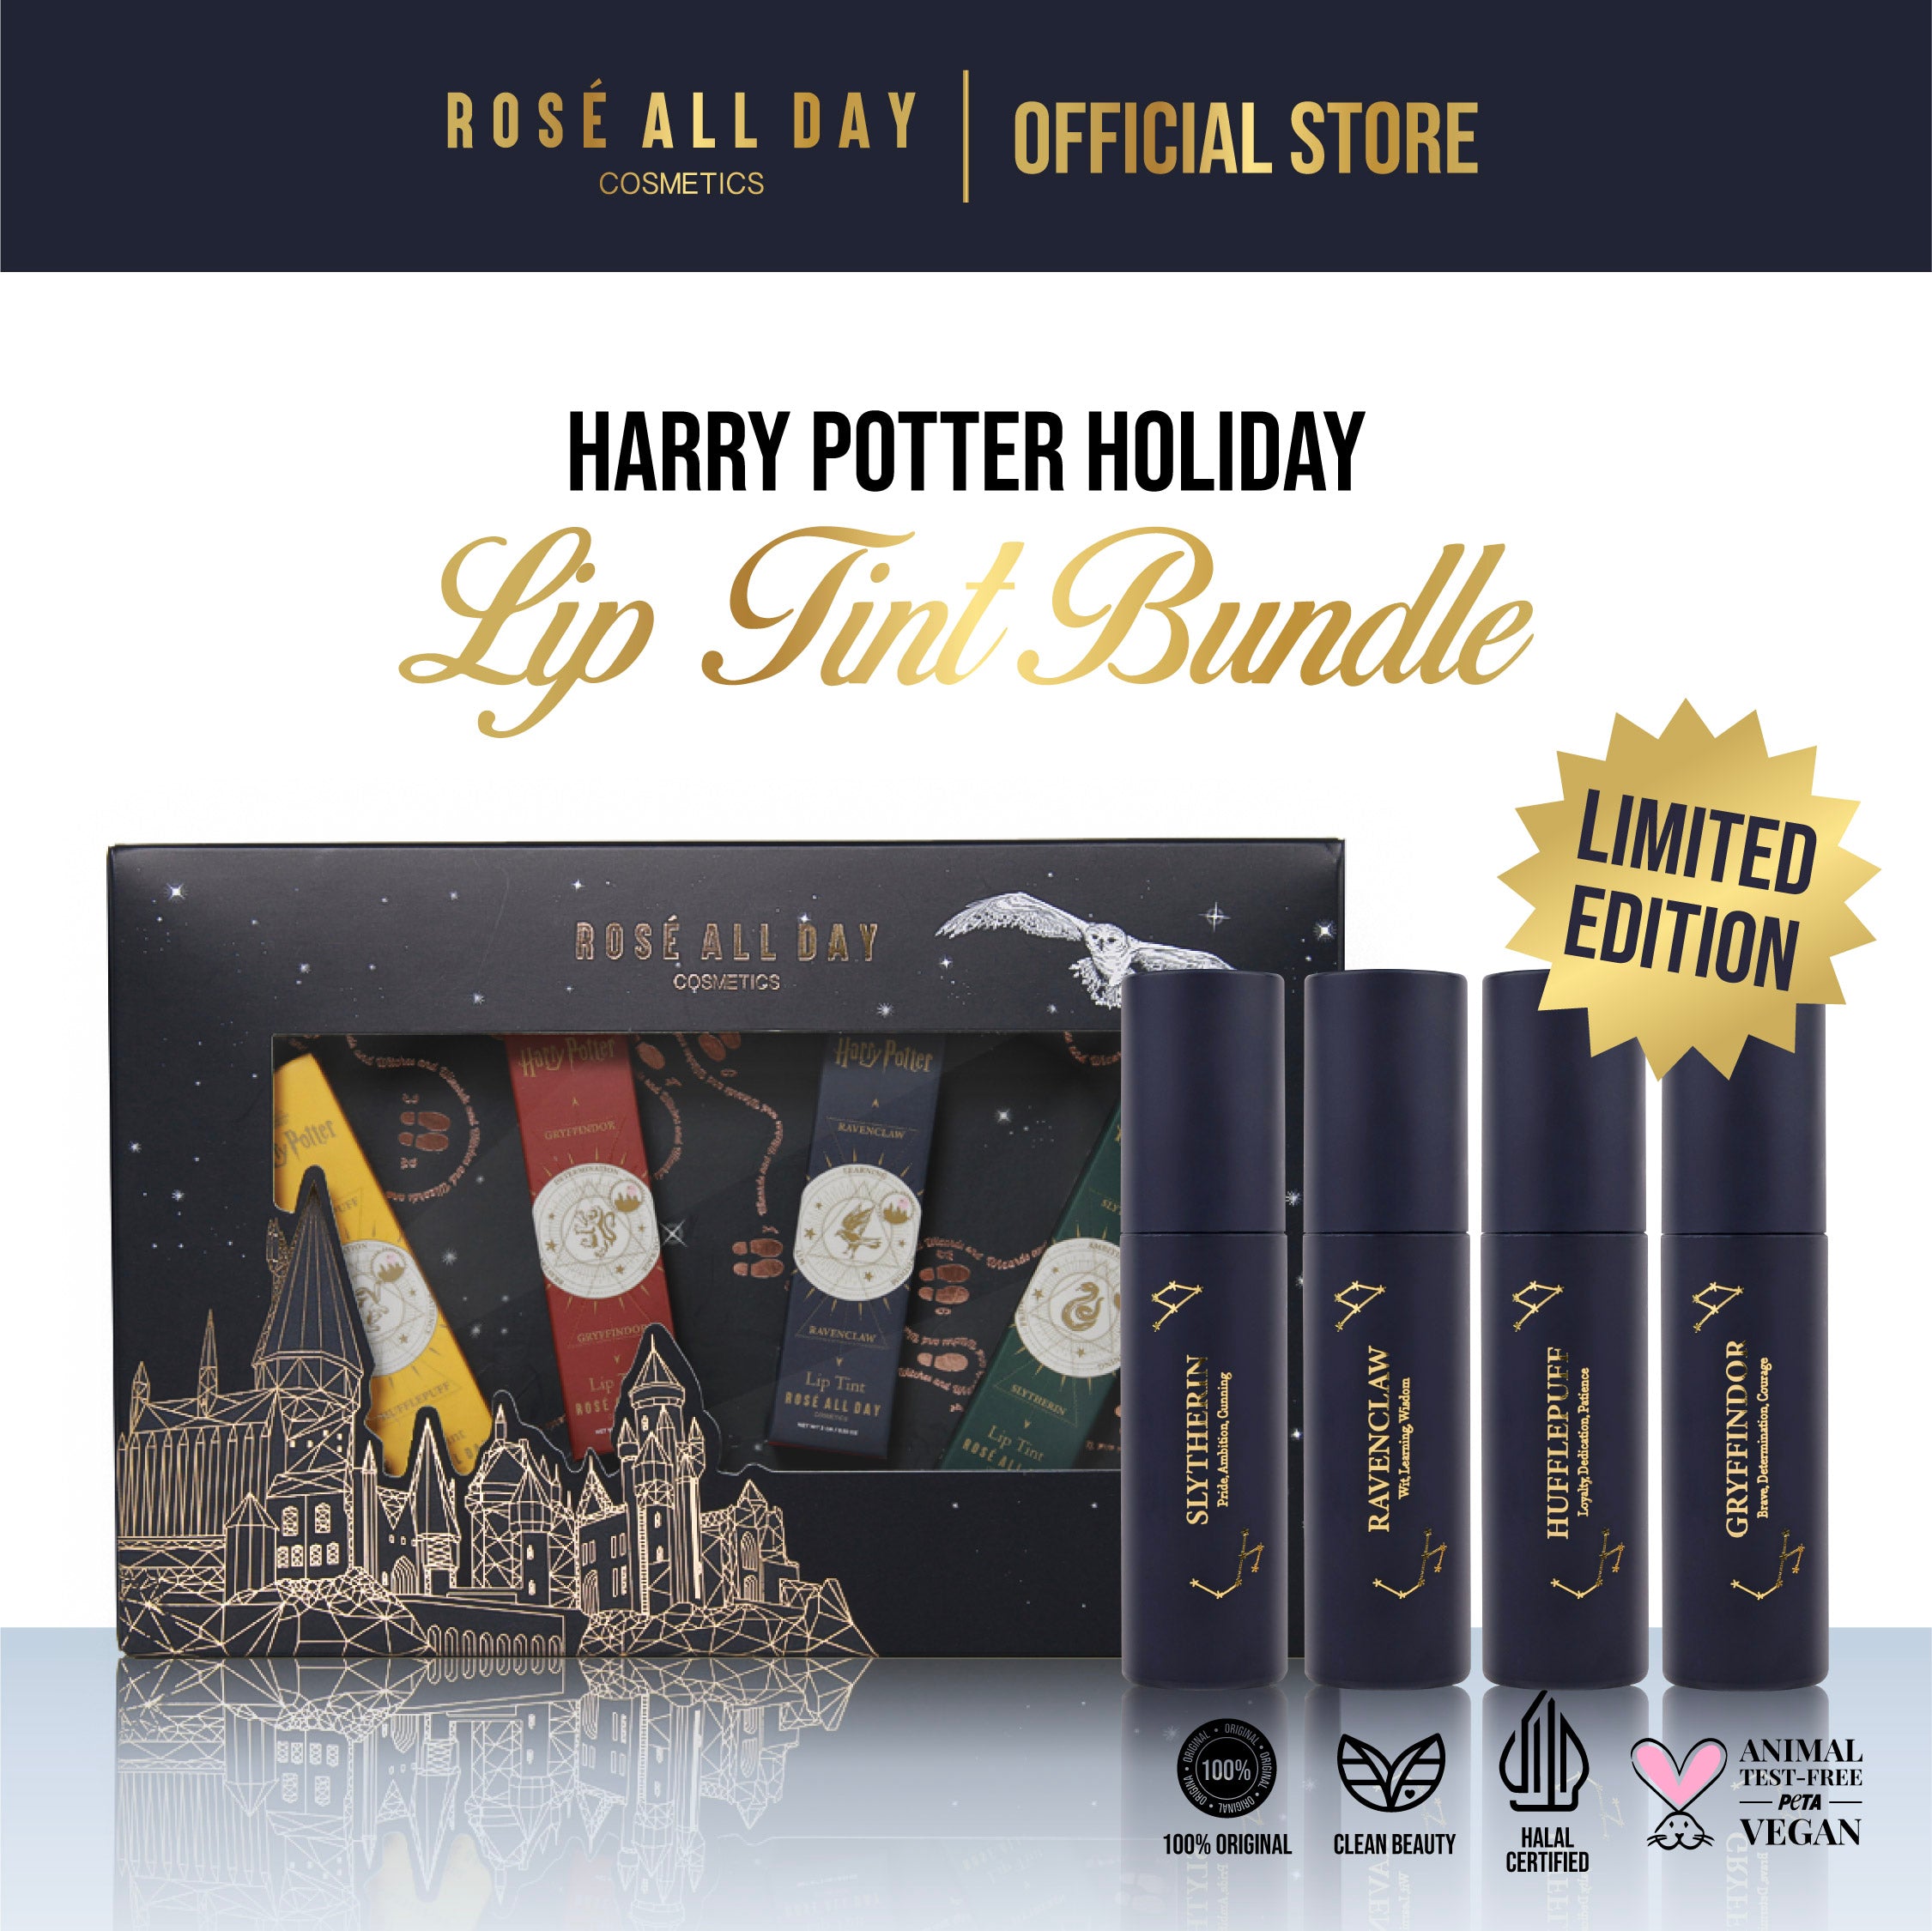 Rosé All Day Harry Potter Holiday Lip Tint Bundle (Limited Edition)